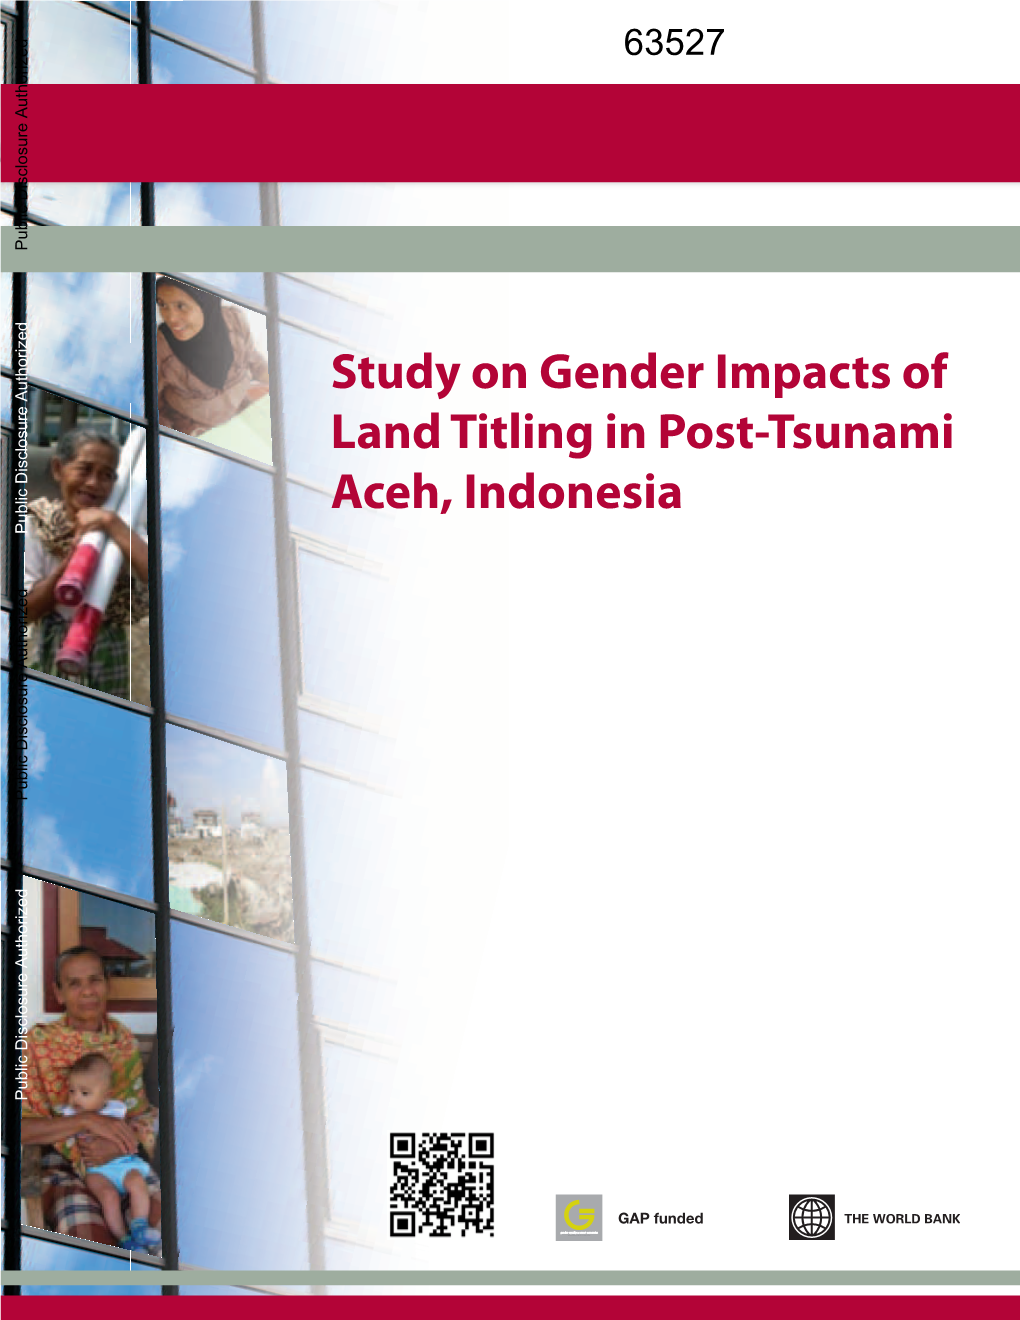 Study on Gender Impacts of Land Titling in Post-Tsunami Aceh, Indonesia Public Disclosure Authorized Public Disclosure Authorized Public Disclosure Authorized